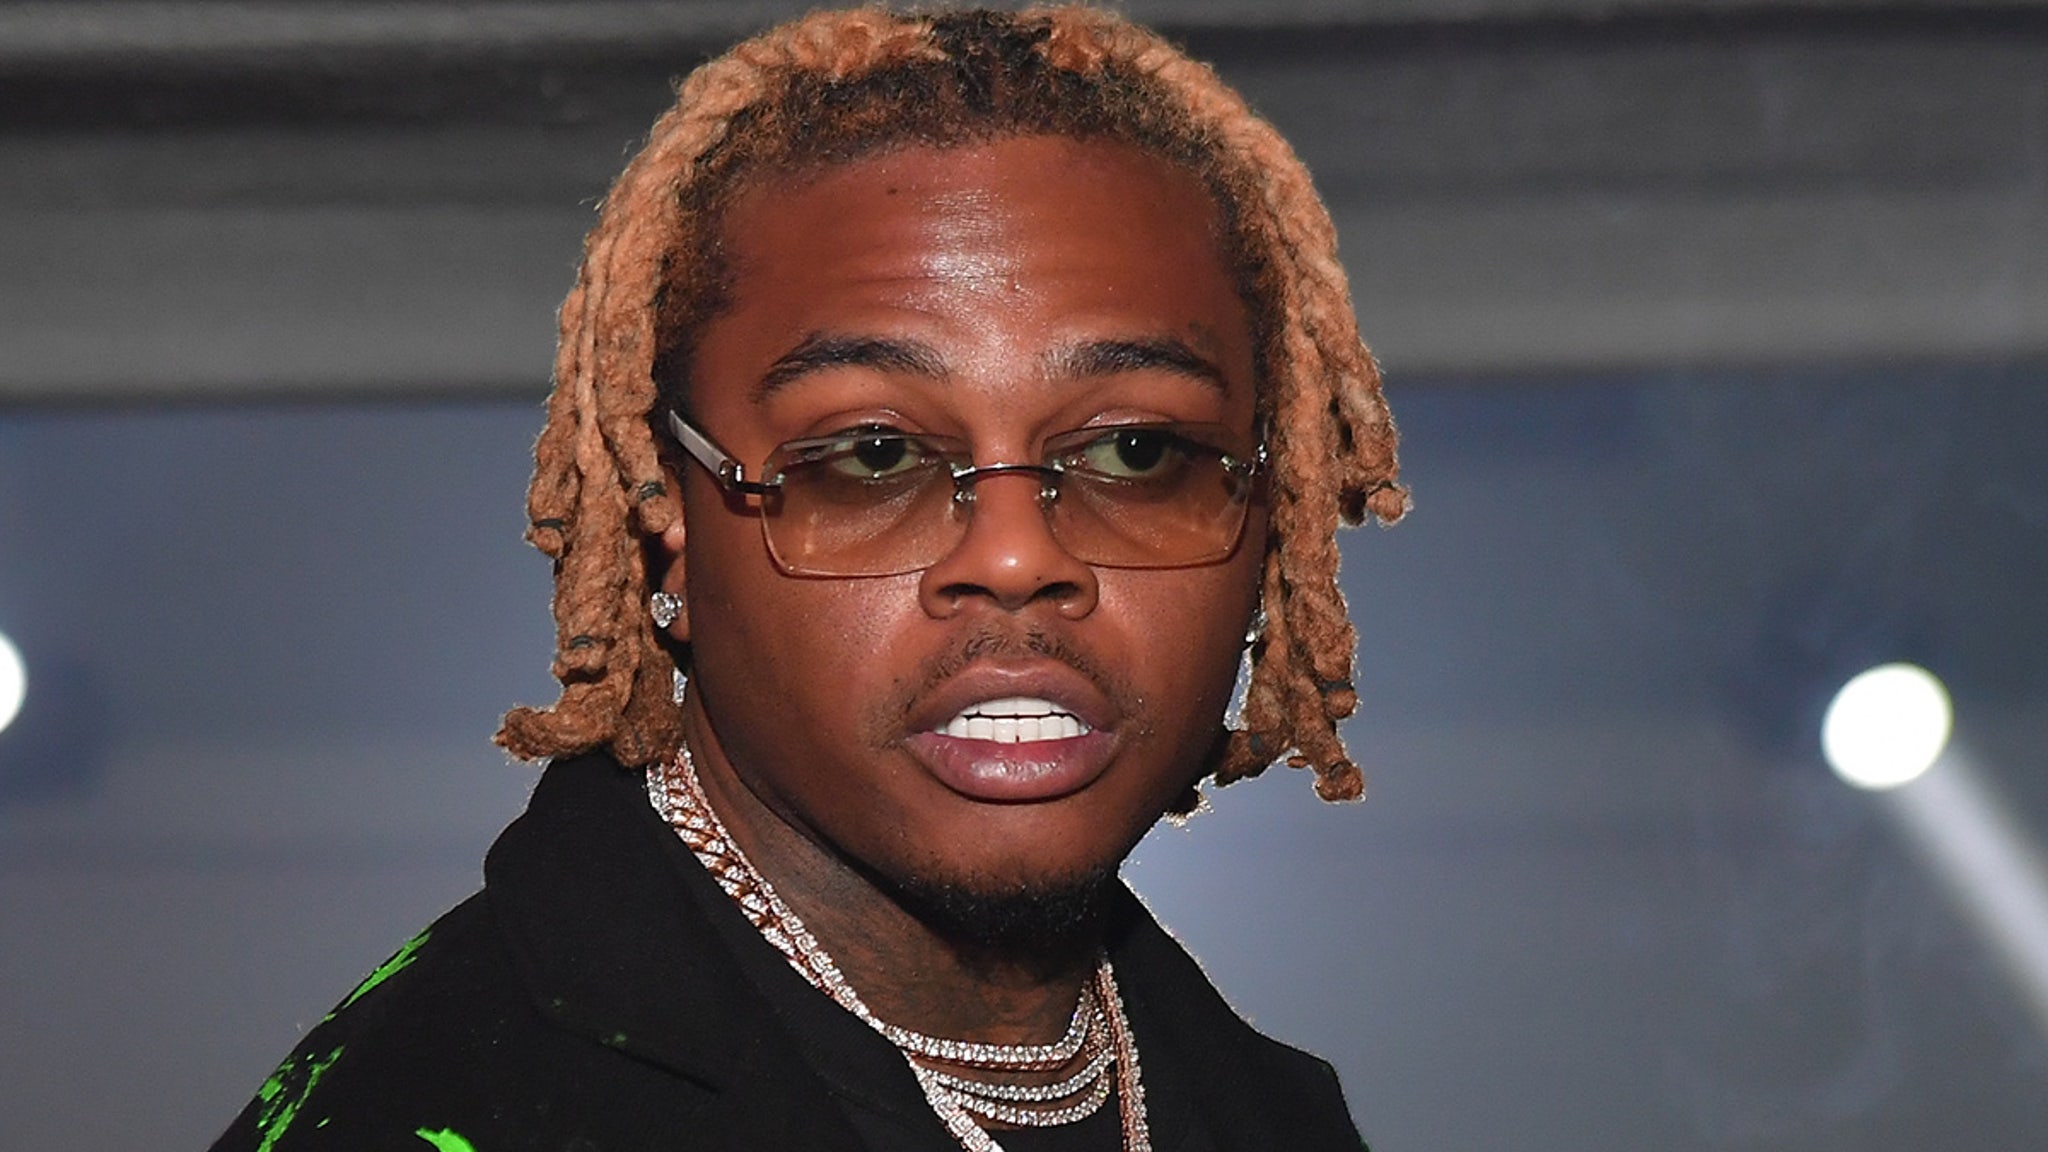 Gunna Got Family and Business Affairs In Line Before Turning Himself In – TMZ